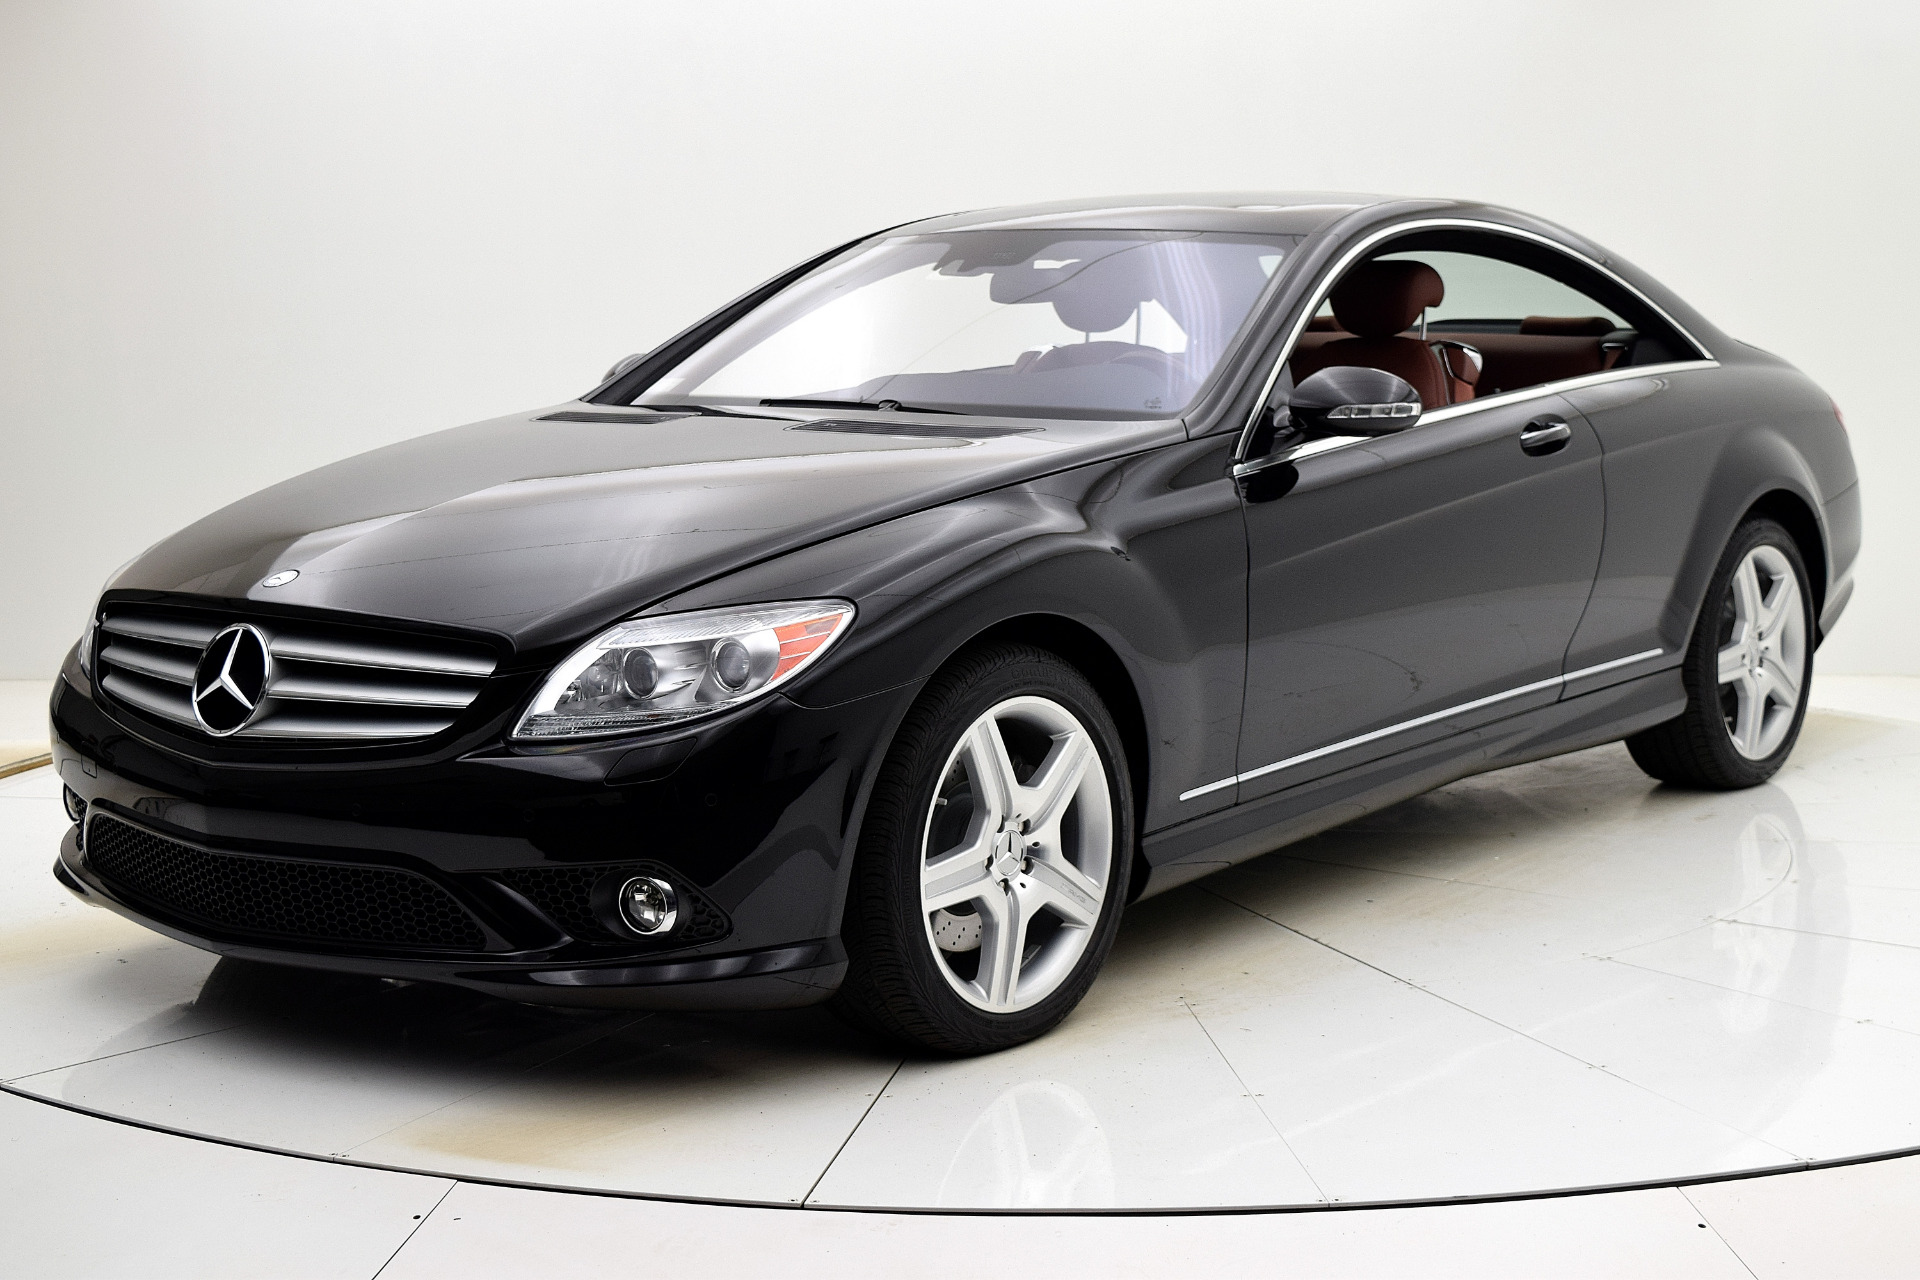 Used 2009 Mercedes-Benz CL-Class 5.5L V8 For Sale (Sold) | FC Kerbeck Stock  #21BE133AJI